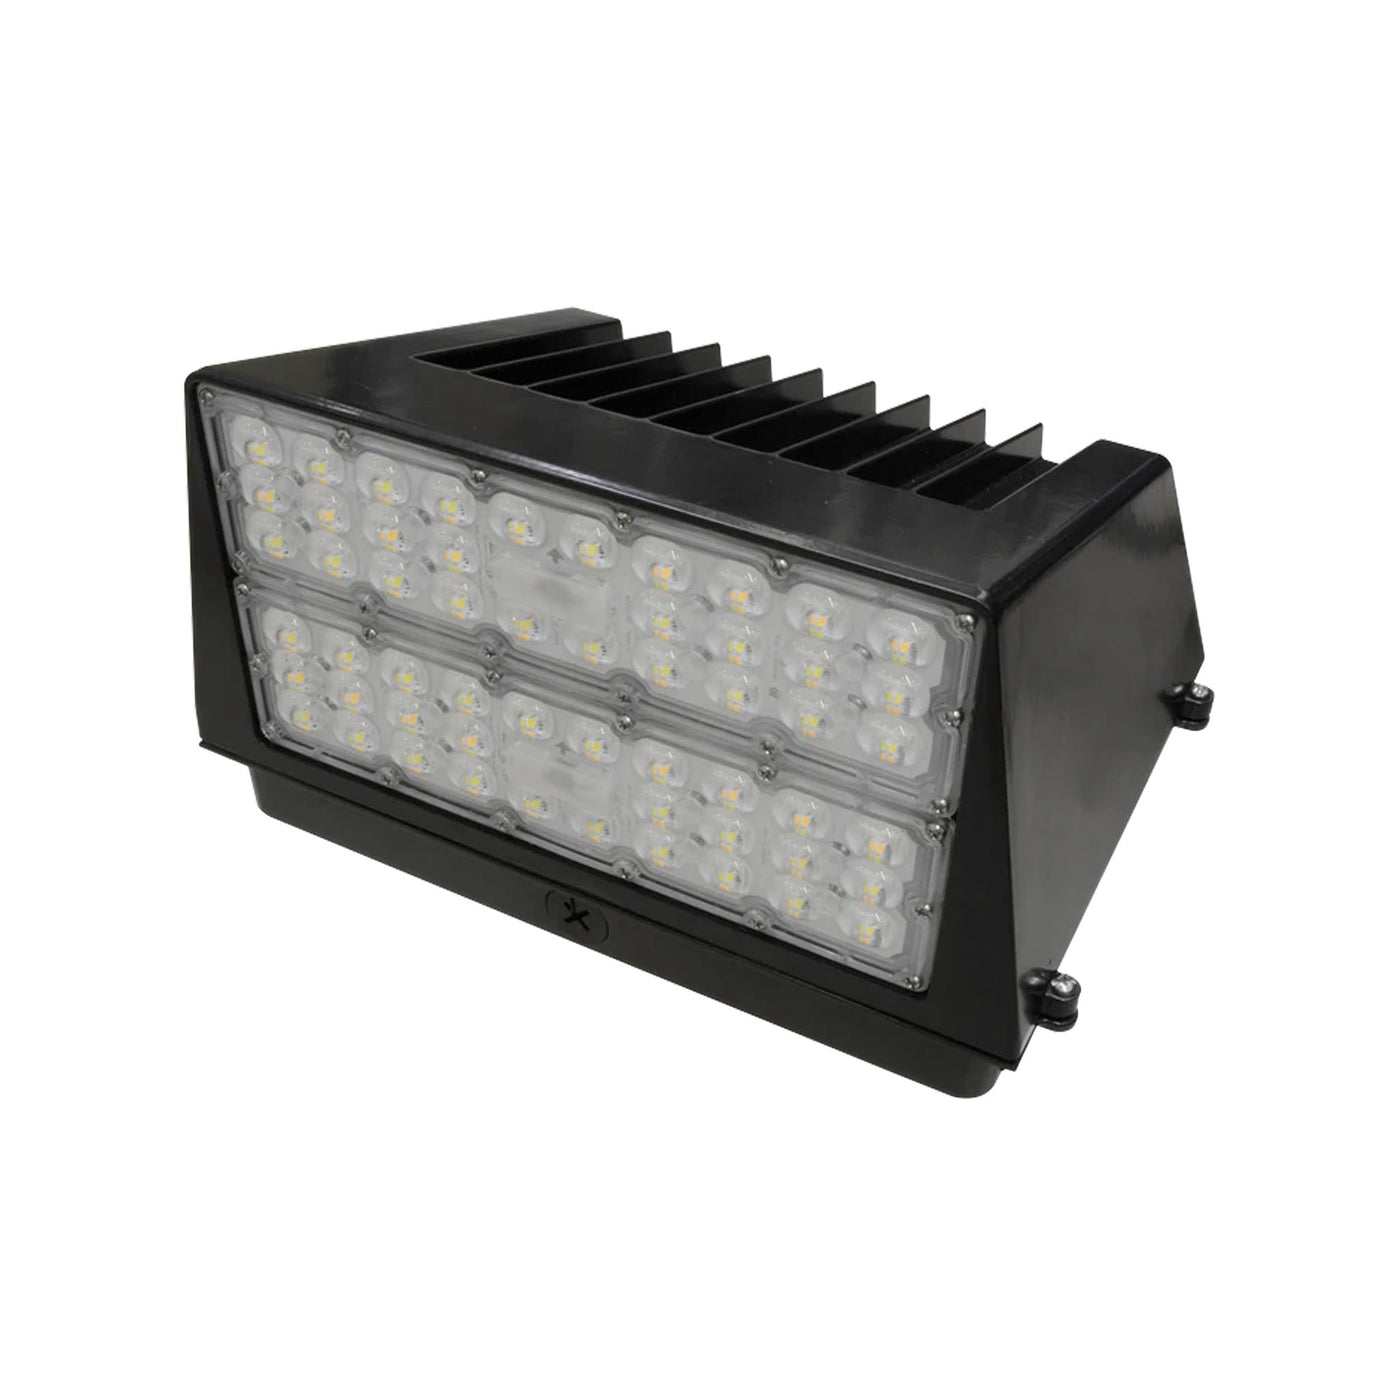 LED Full Cutoff Wall Pack, 60W/80W/110W Selectable, 14121 Lumens, CCT Selectable 3000K/4000K/5000K, Integrated Photocell, Emergency Backup, 120-277V